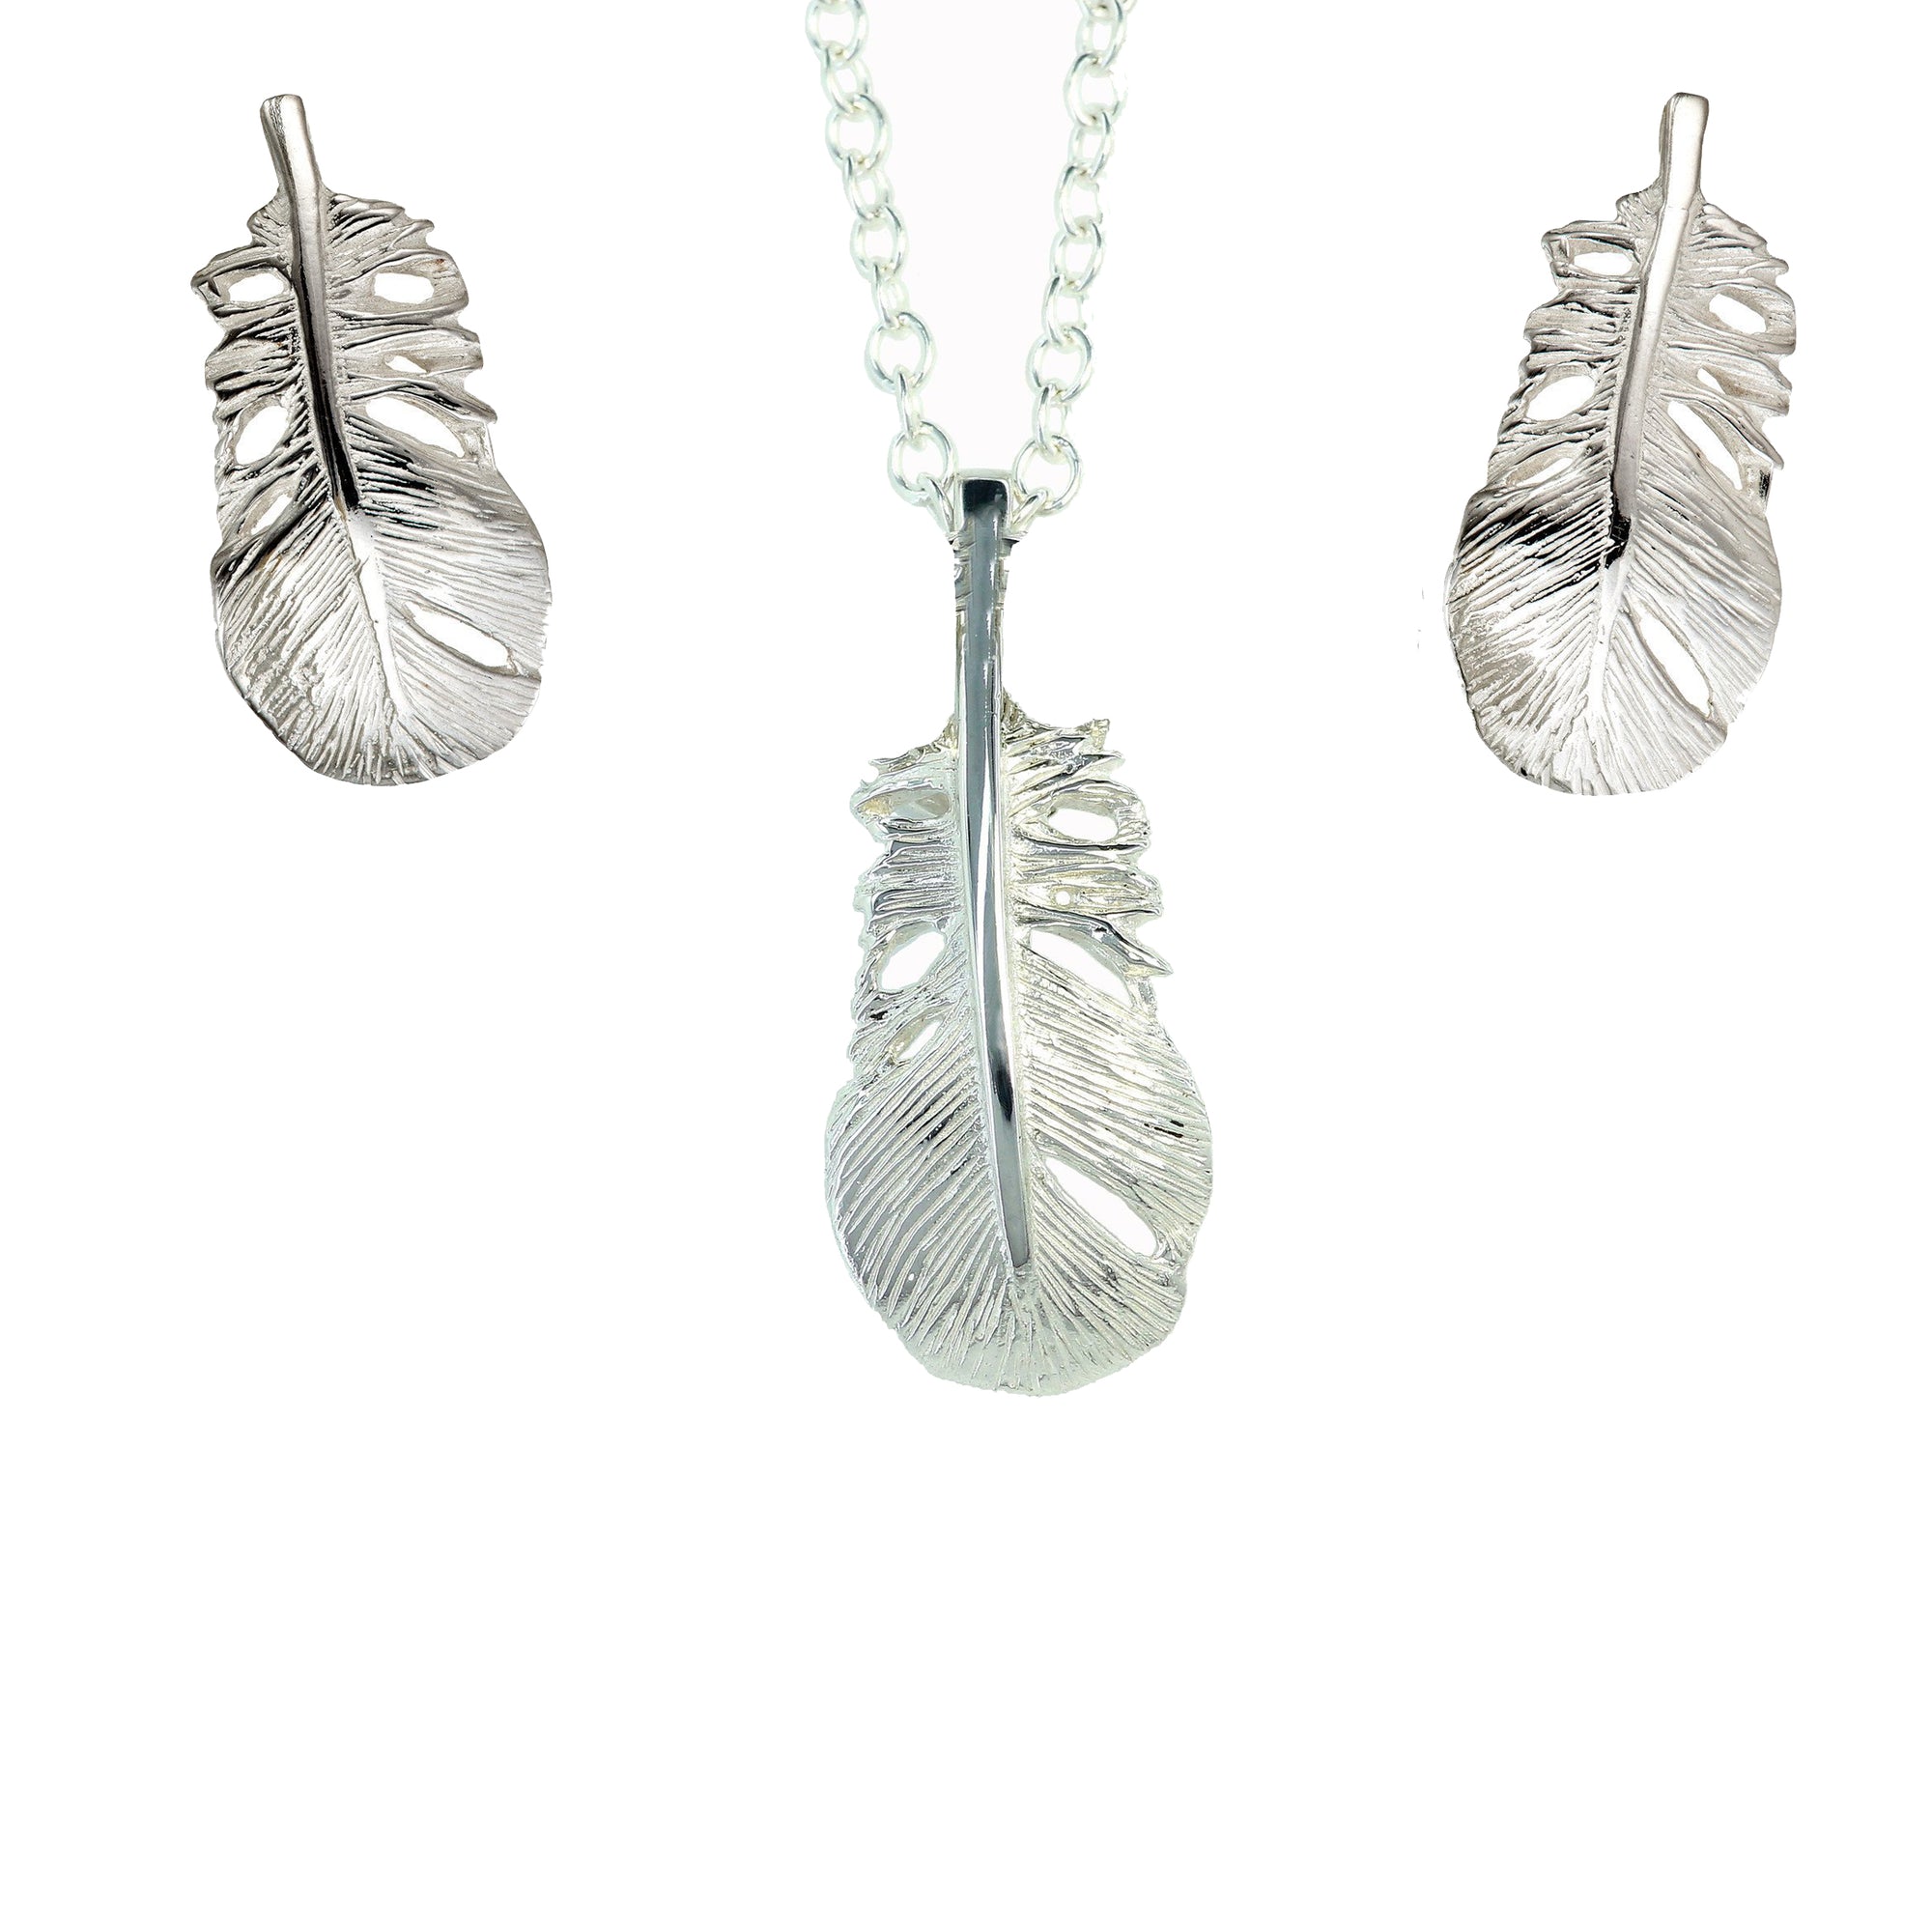 Baby Angel Feather Jewellery Set handcrafted with sterling silver.